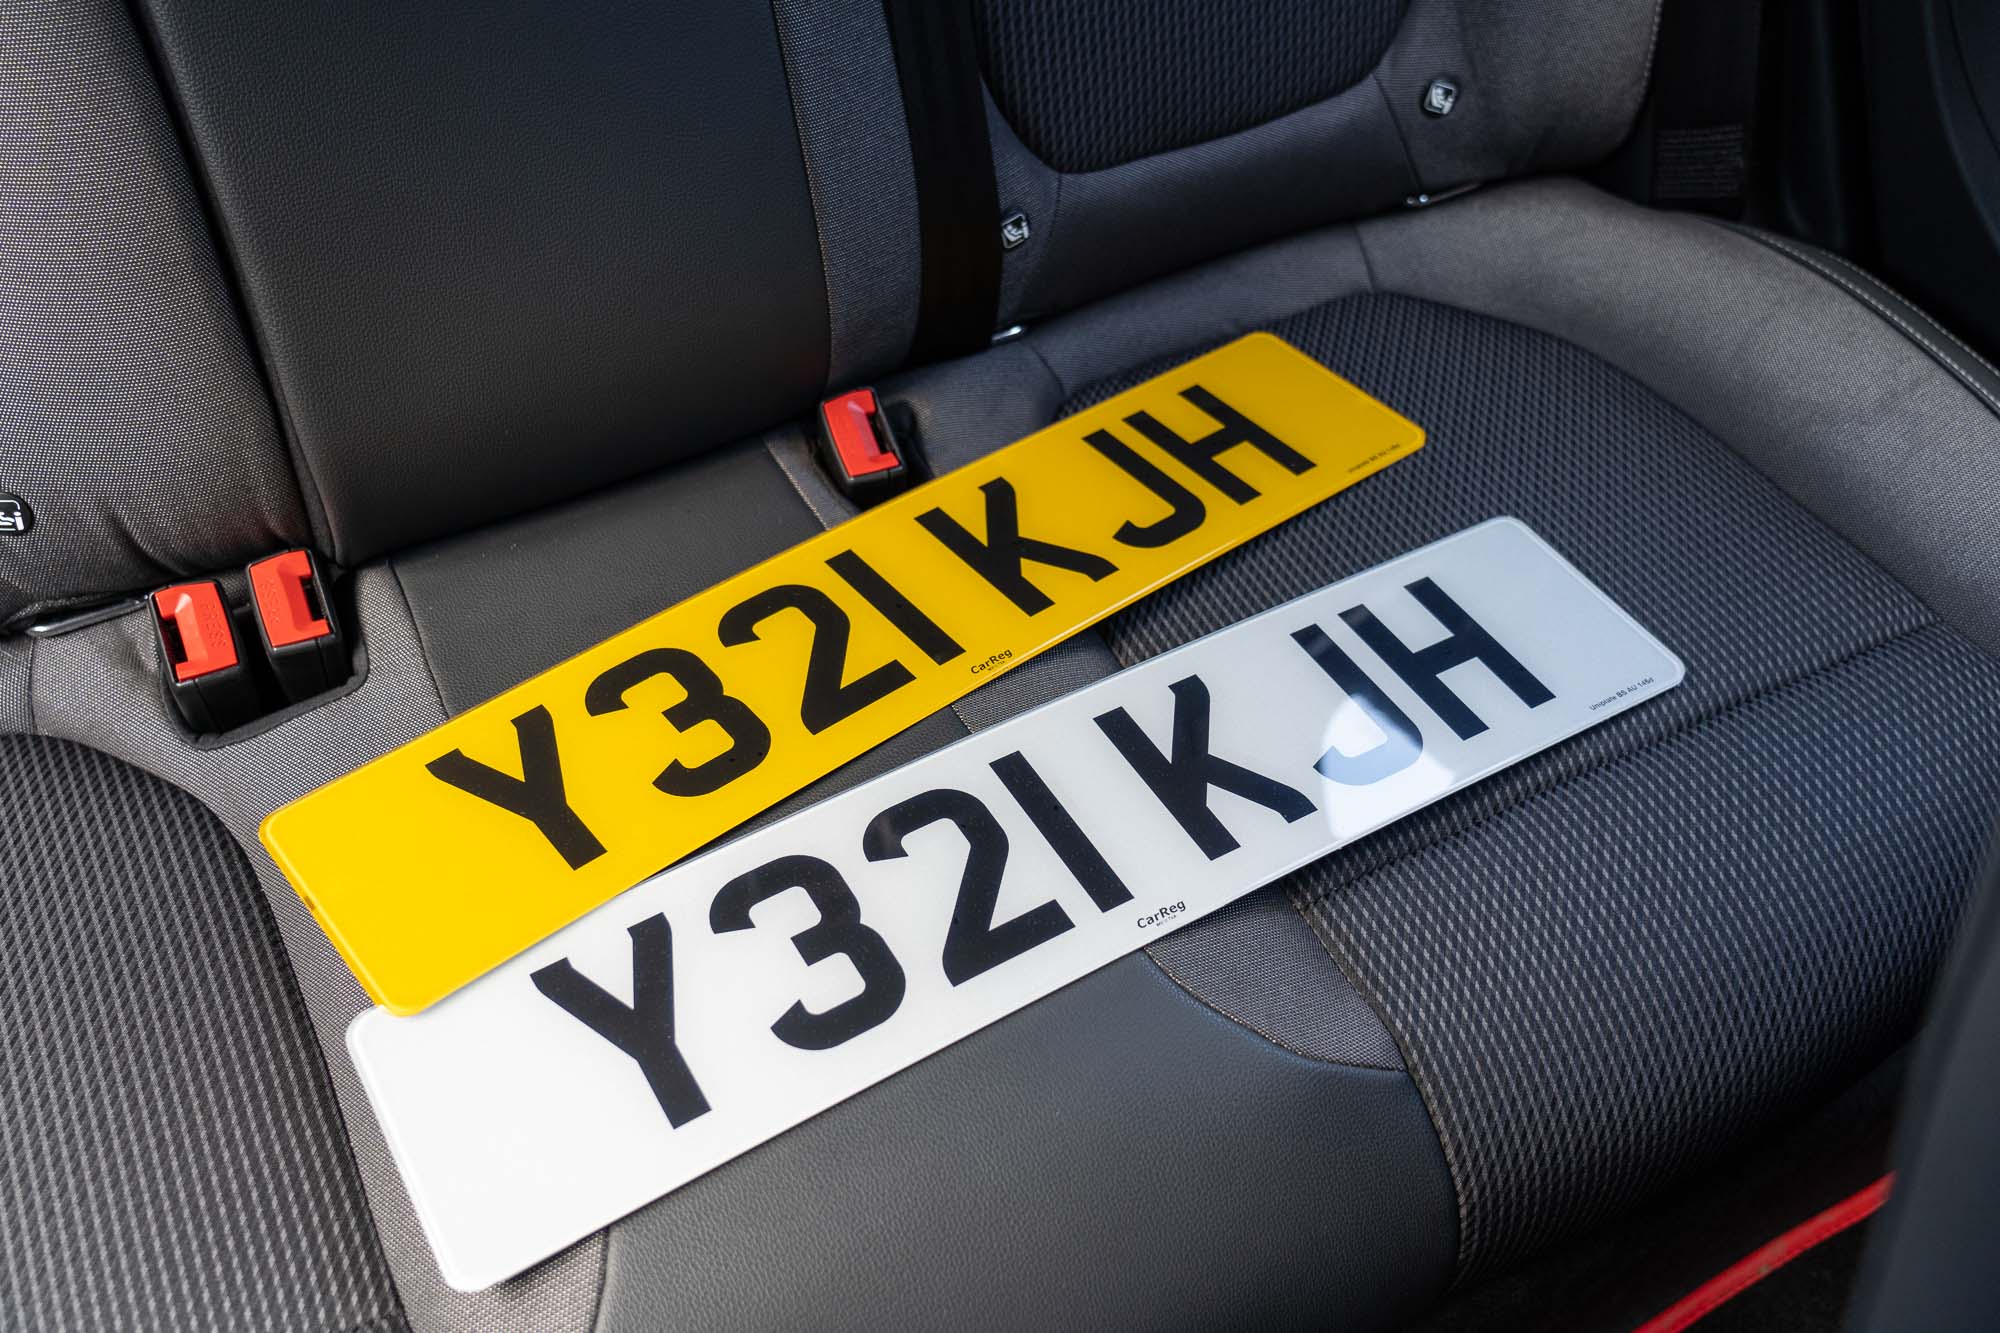 assigning private number plate without v5